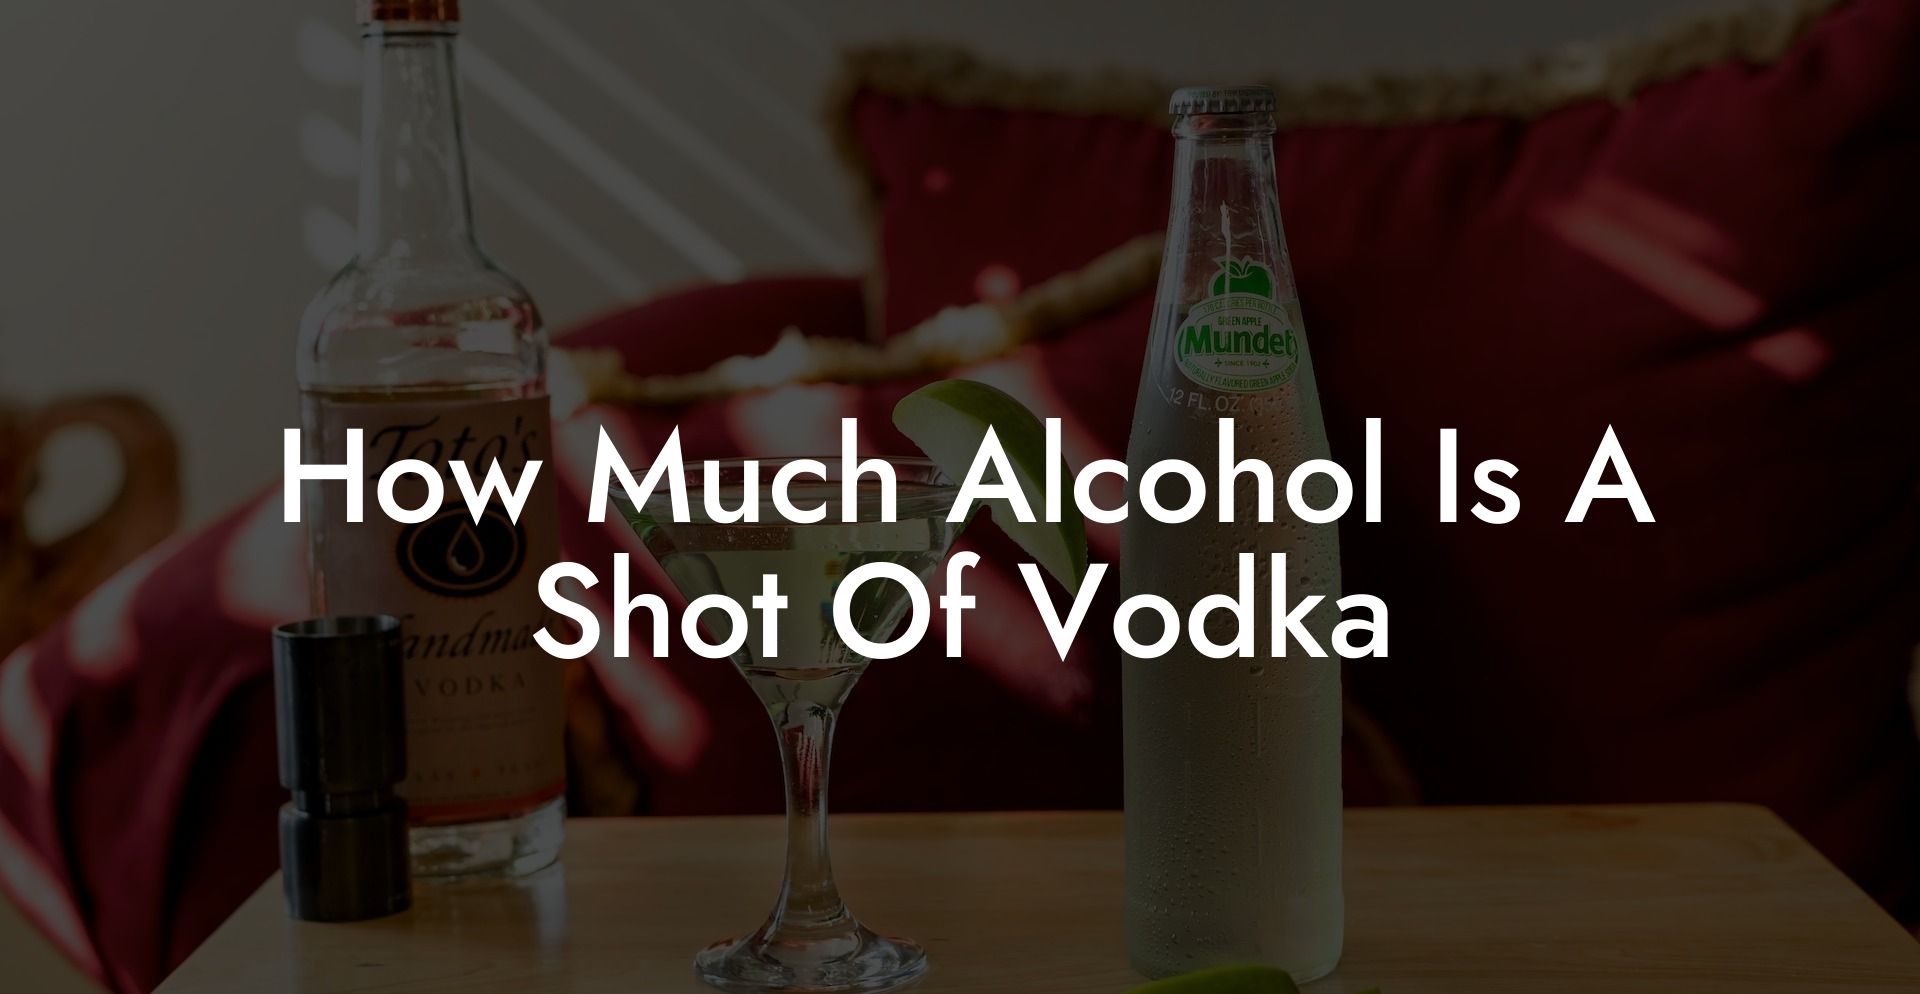 How Much Alcohol Is A Shot Of Vodka